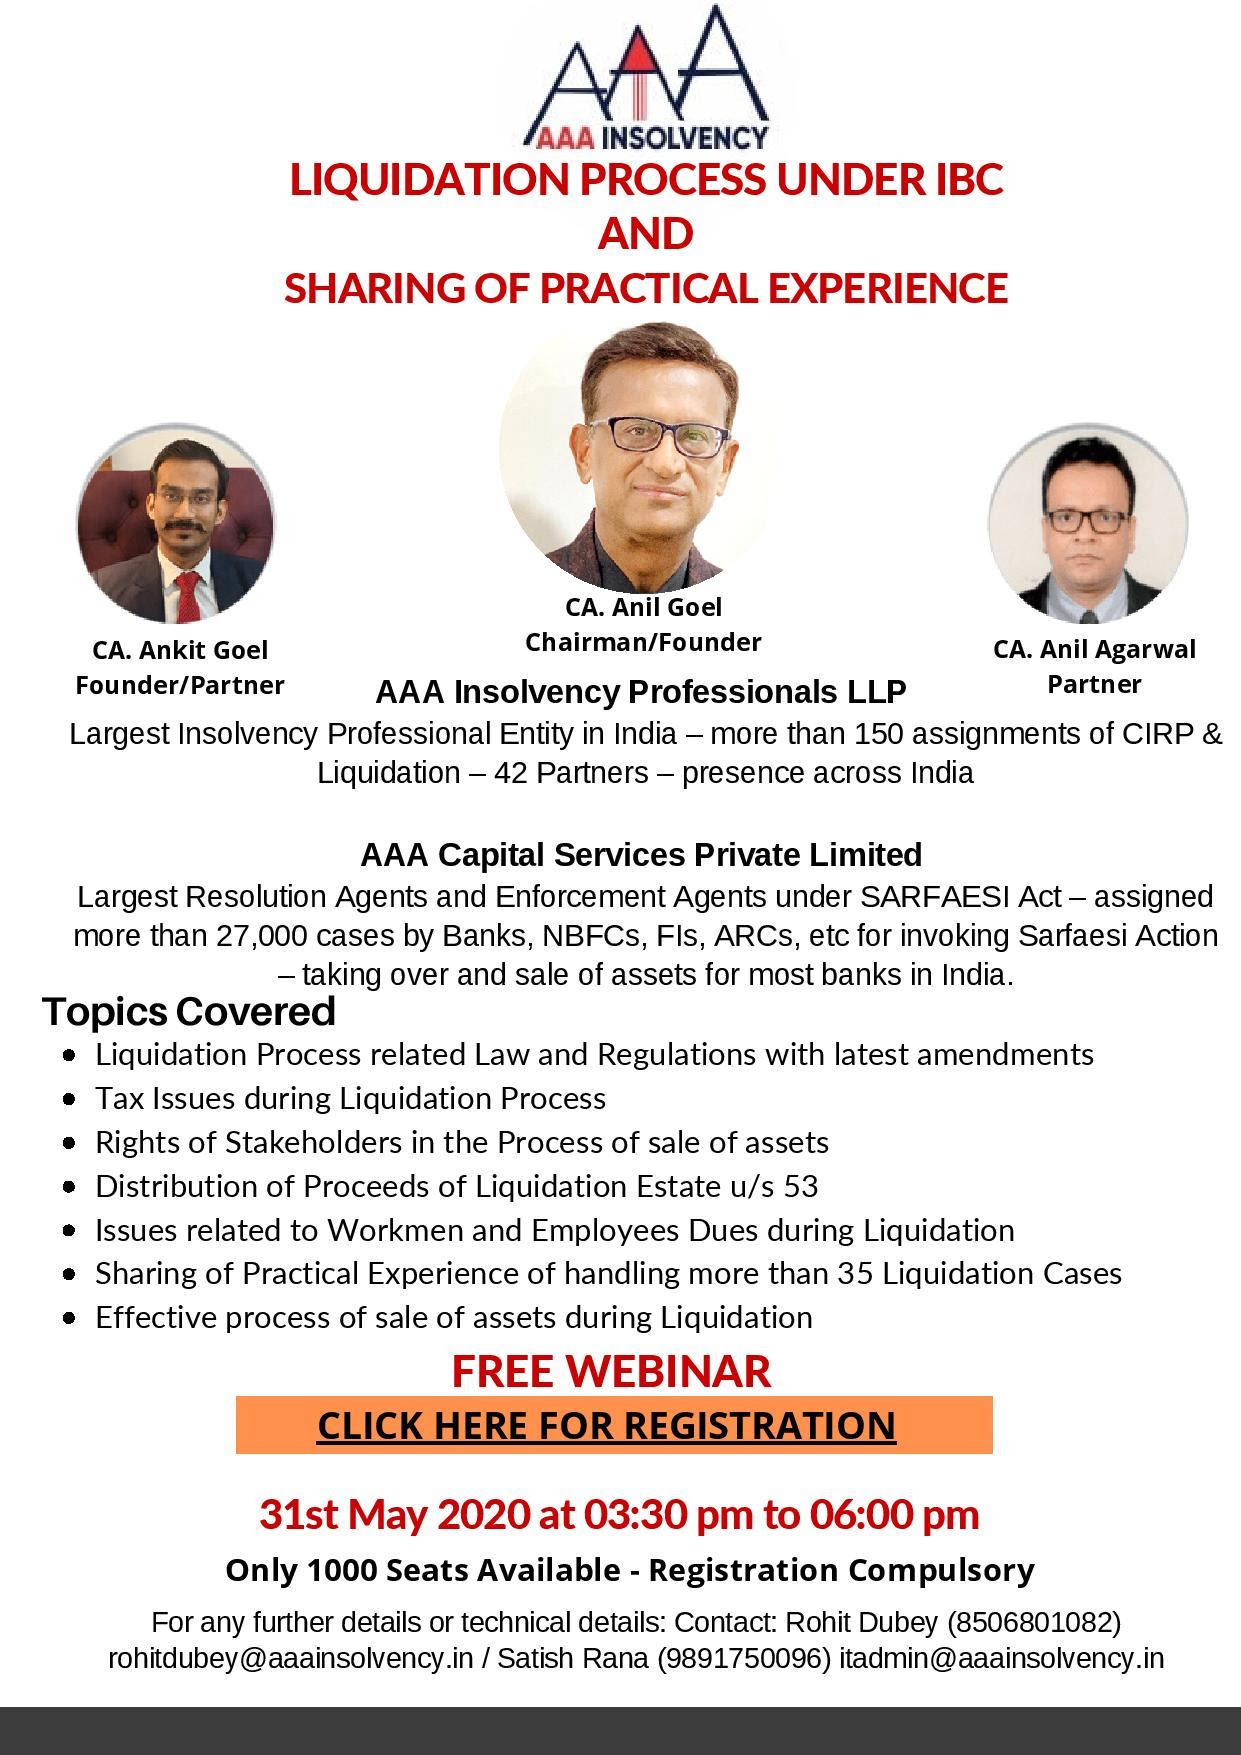 Webinar on Liquidation Process under IBC & Sharing of Practical Experience